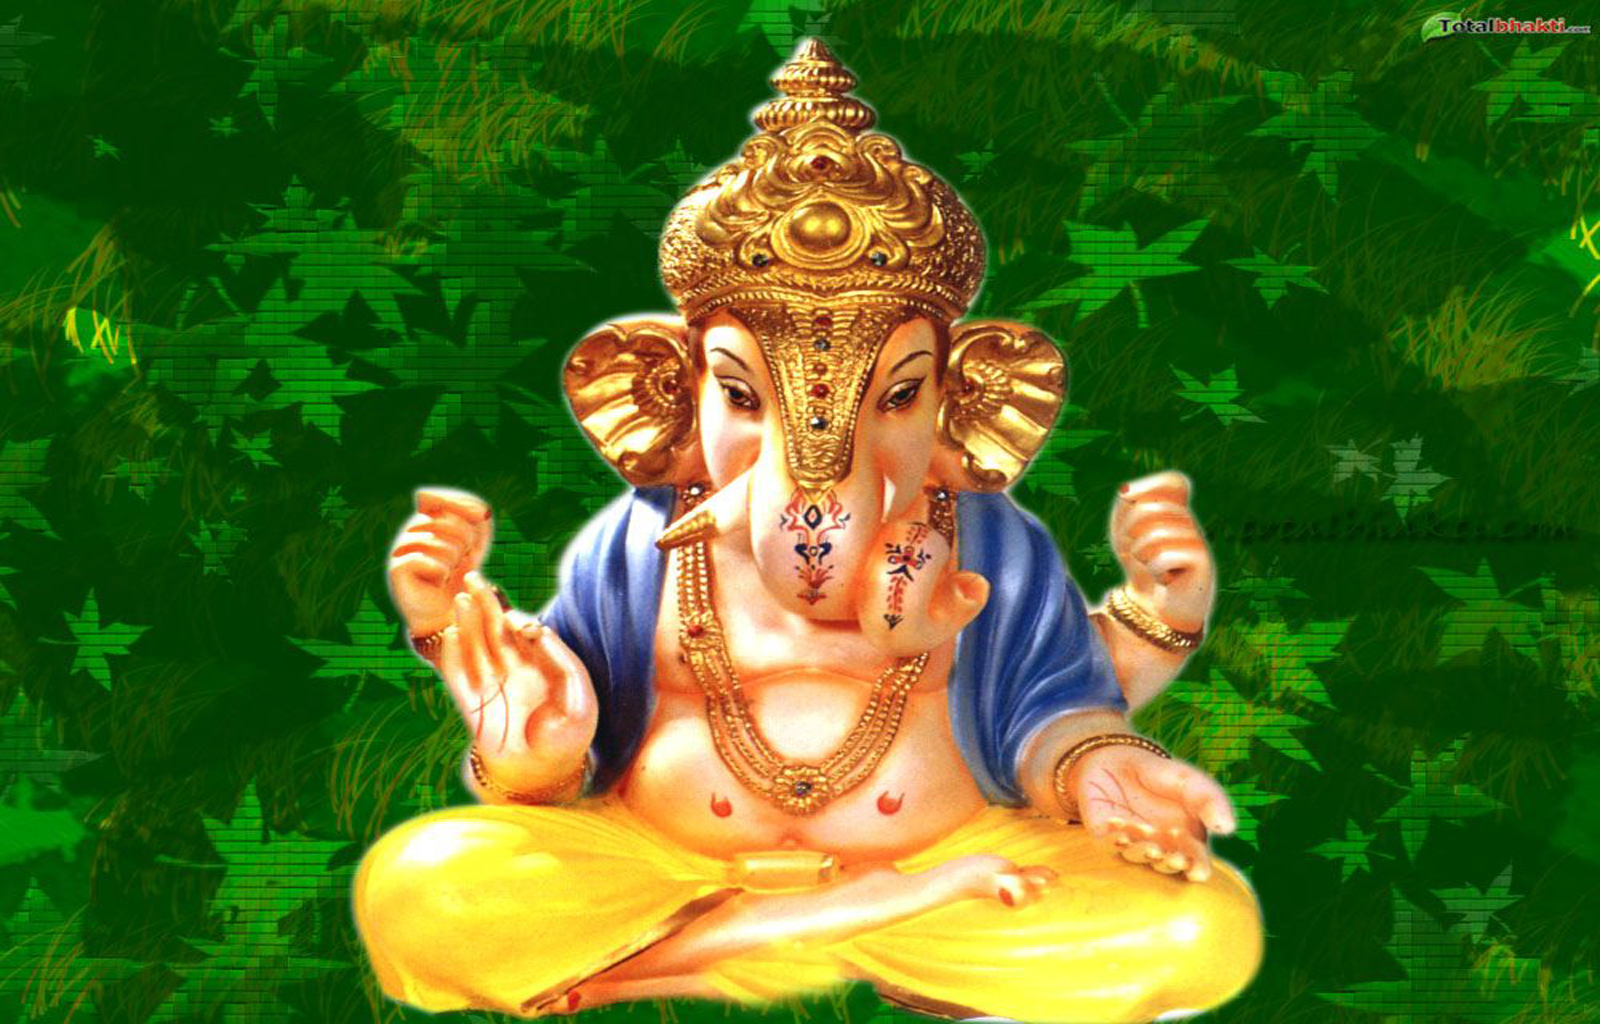 Free download Ganesh Images Wallpaper 2013 Collection Wallpaper HD